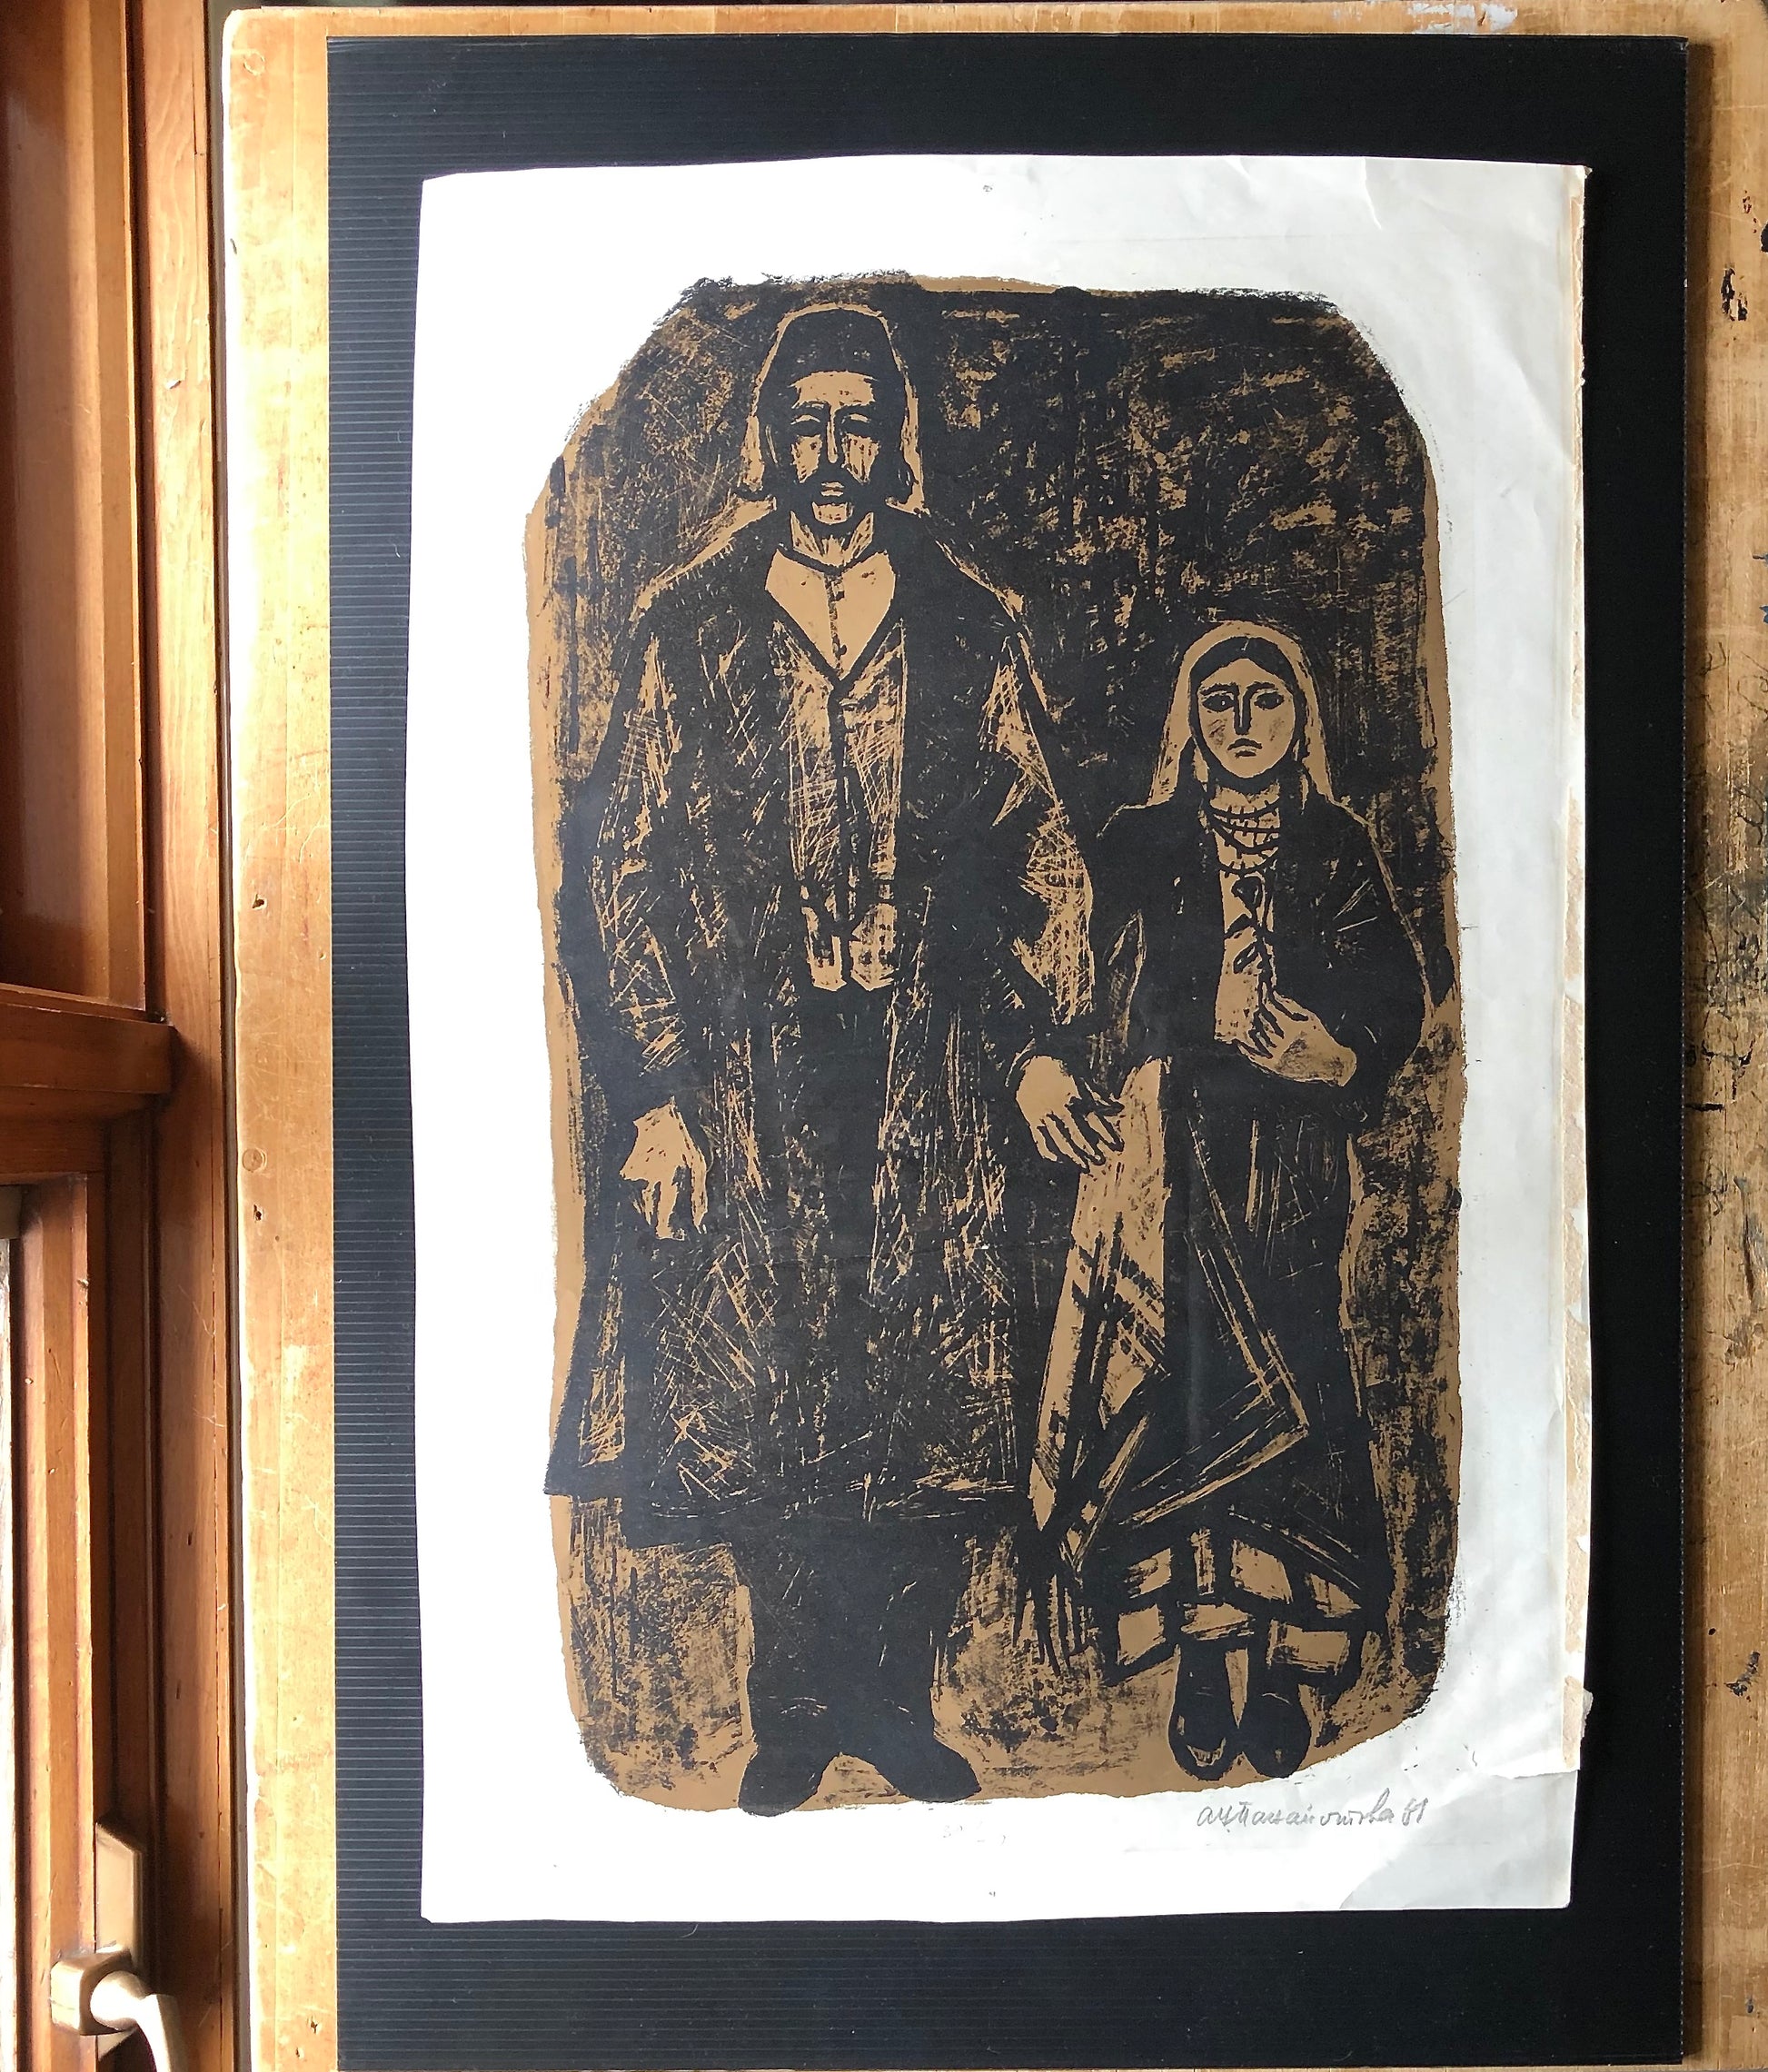 Vintage Art Lithograph of Man and Woman, (c.1961)